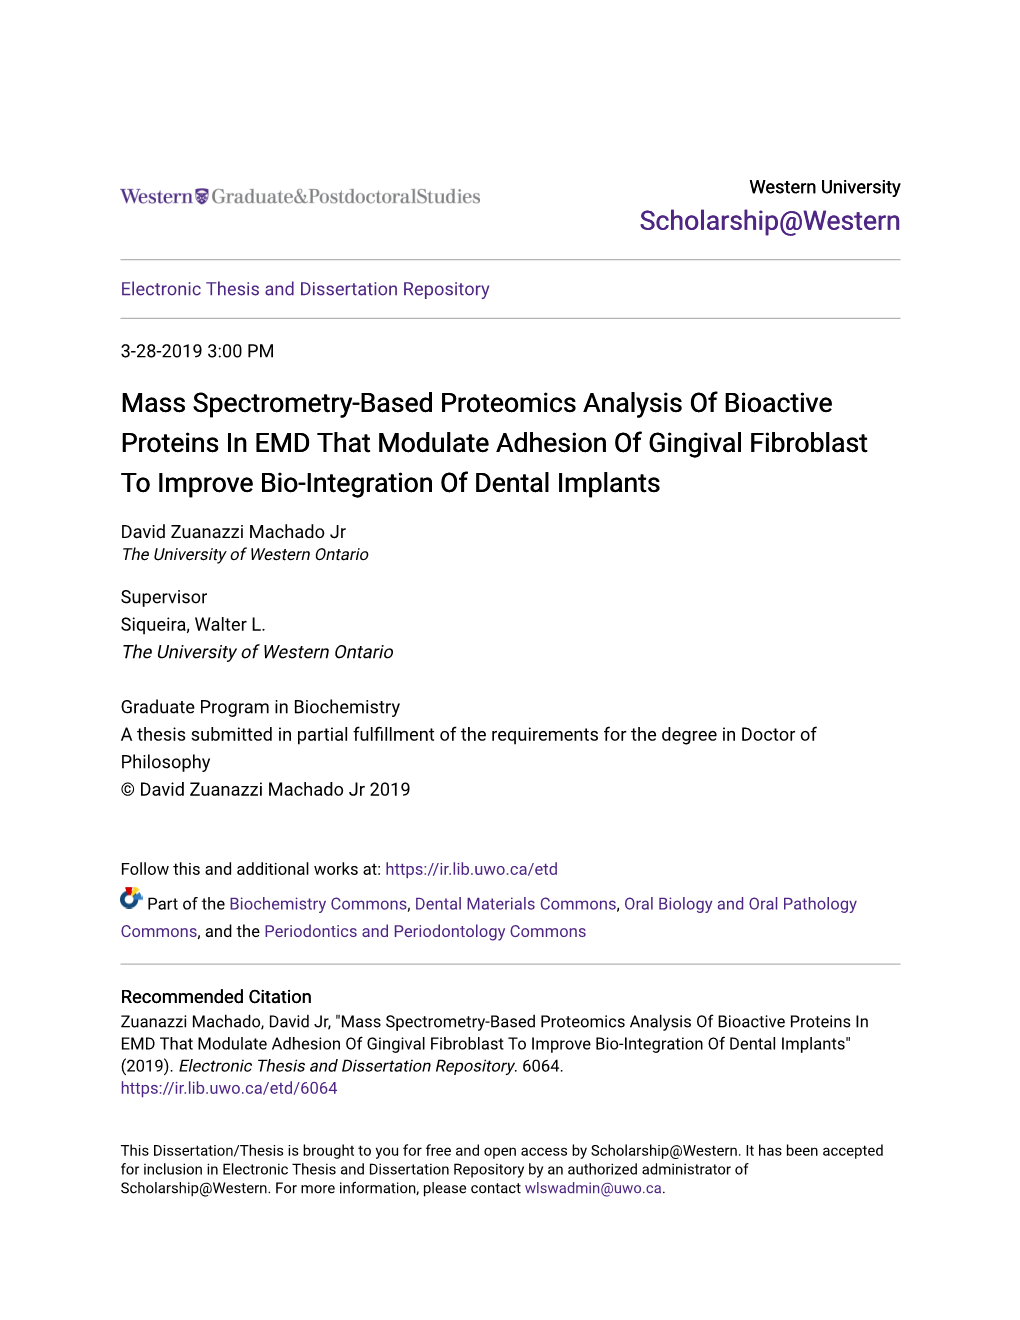 Mass Spectrometry-Based Proteomics Analysis of Bioactive Proteins in EMD That Modulate Adhesion of Gingival Fibroblast to Improve Bio-Integration of Dental Implants